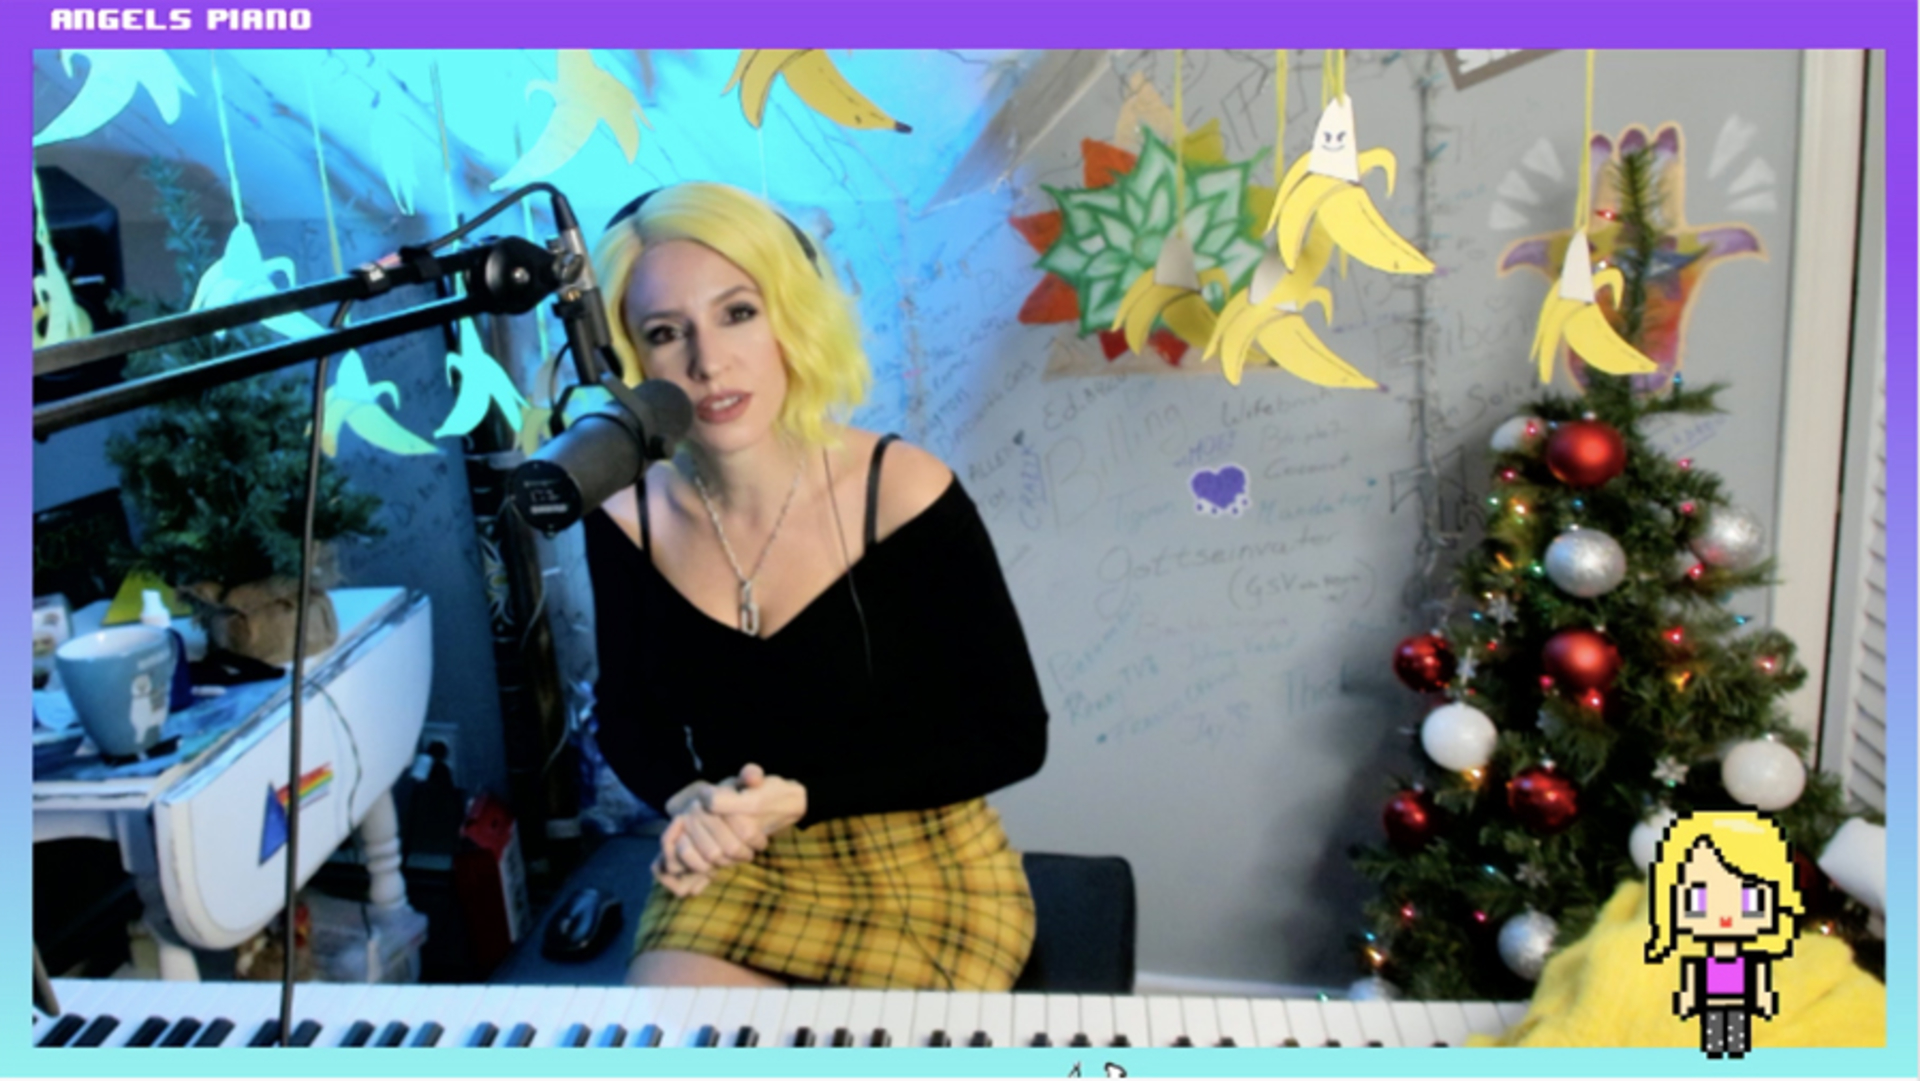 Angels Piano during 12 Days of Streaming